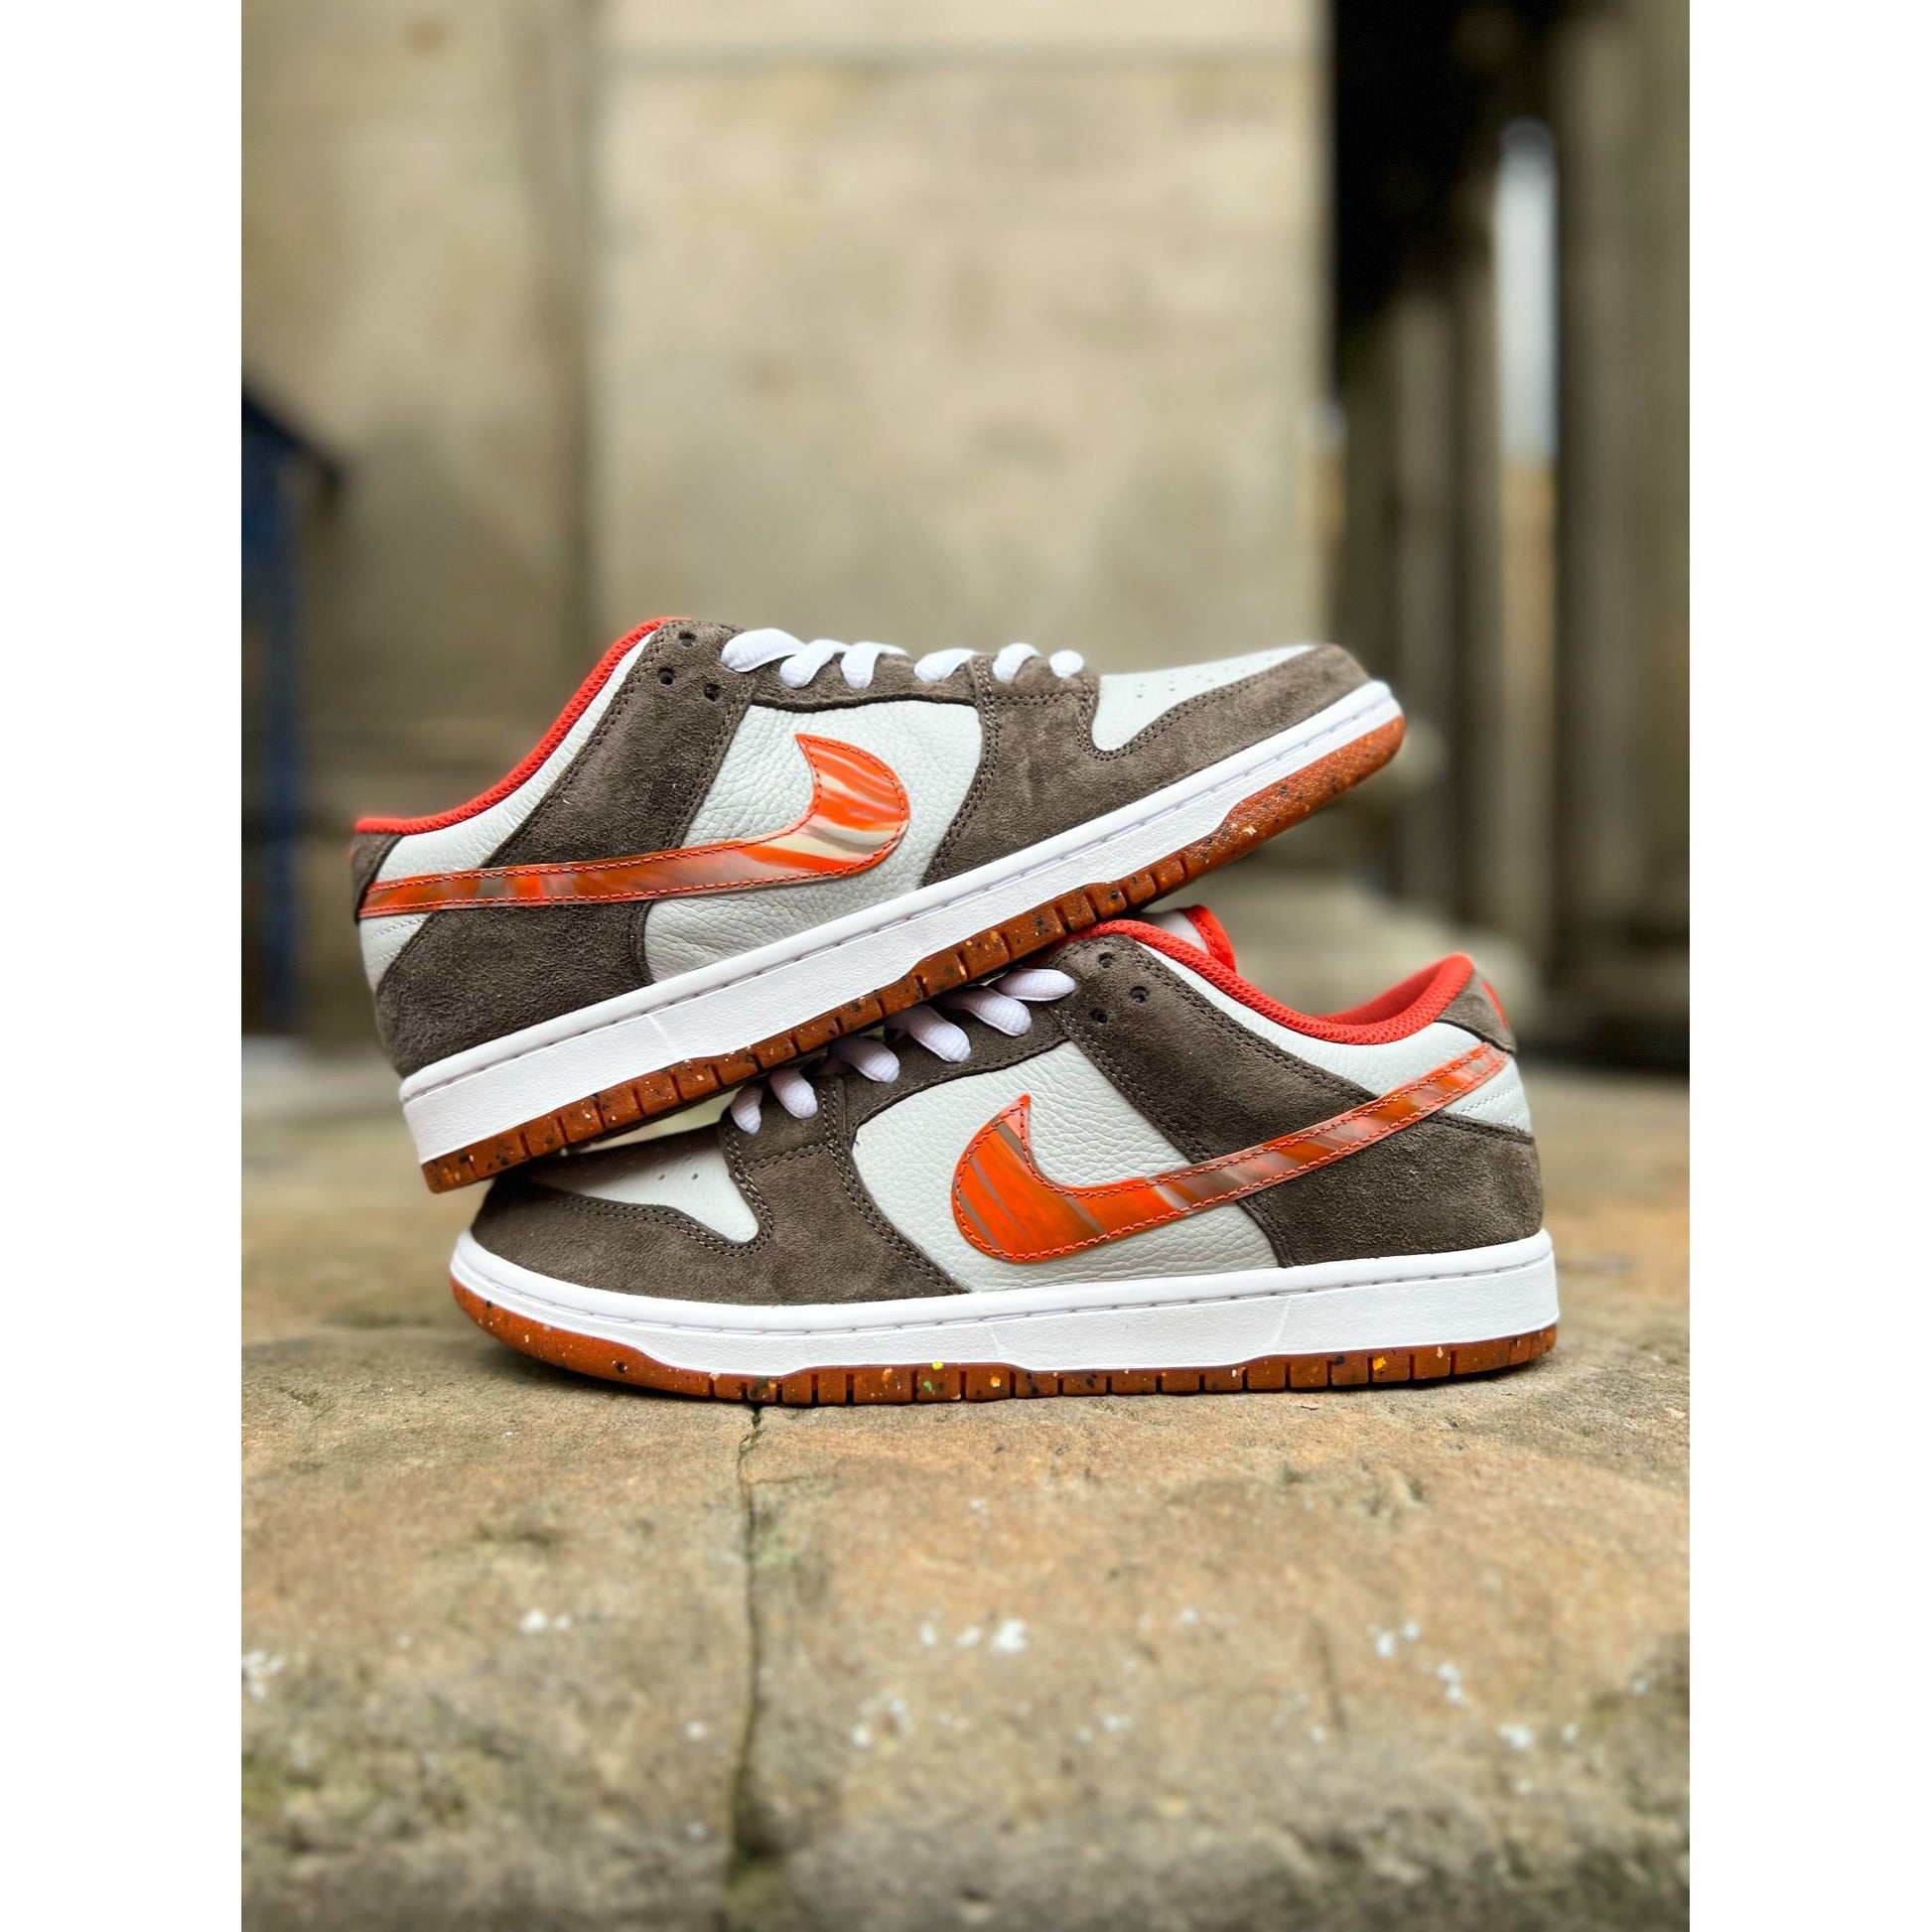 Nike SB Dunk Low Crushed D.C. from Nike